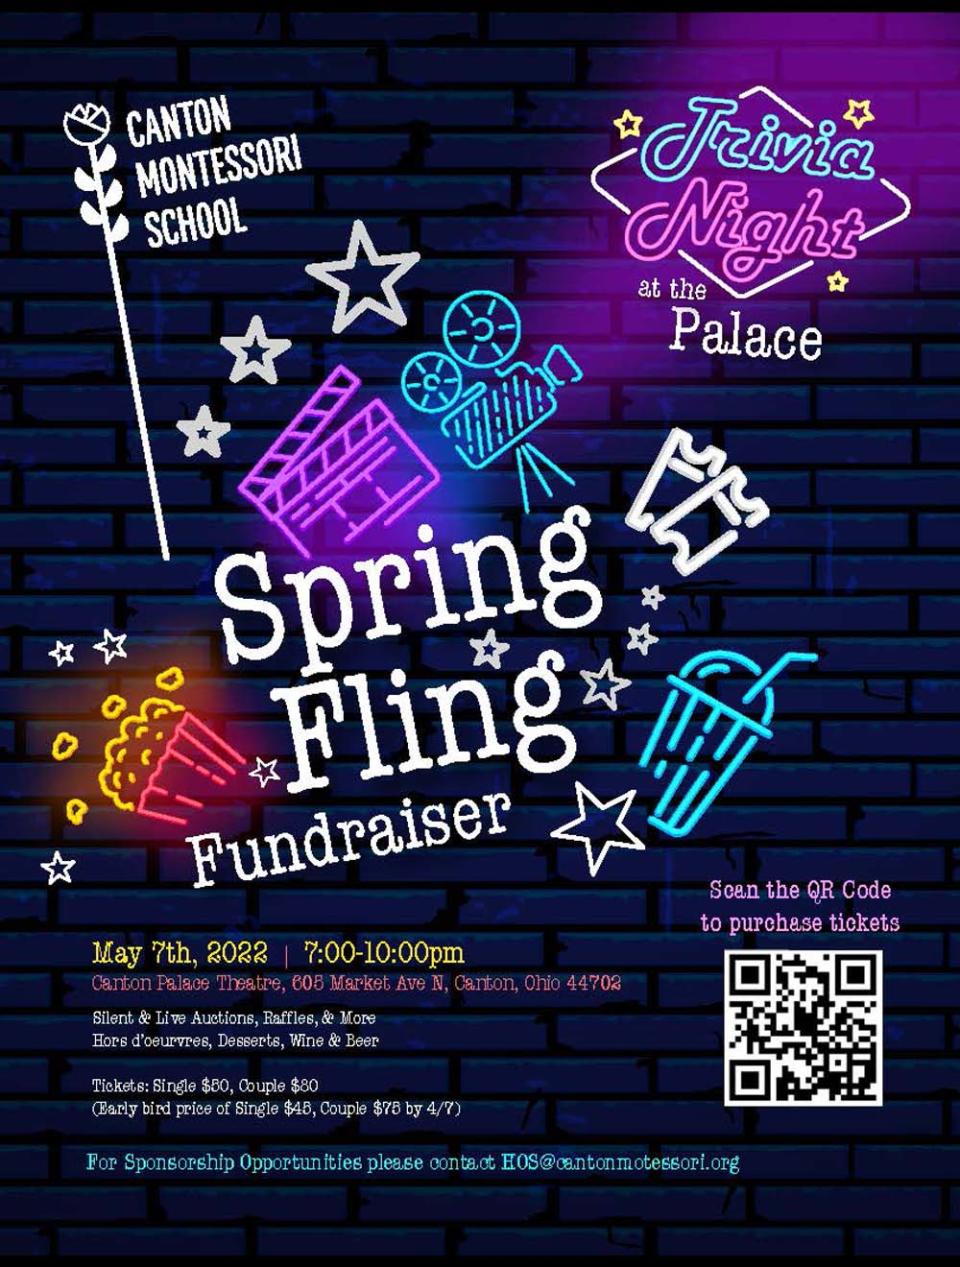 Canton Montessori School will hold a "Spring Fling Fundraiser: Trivia Night" from 7 to 10 p.m. on Saturday at the Canton Palace Theatre